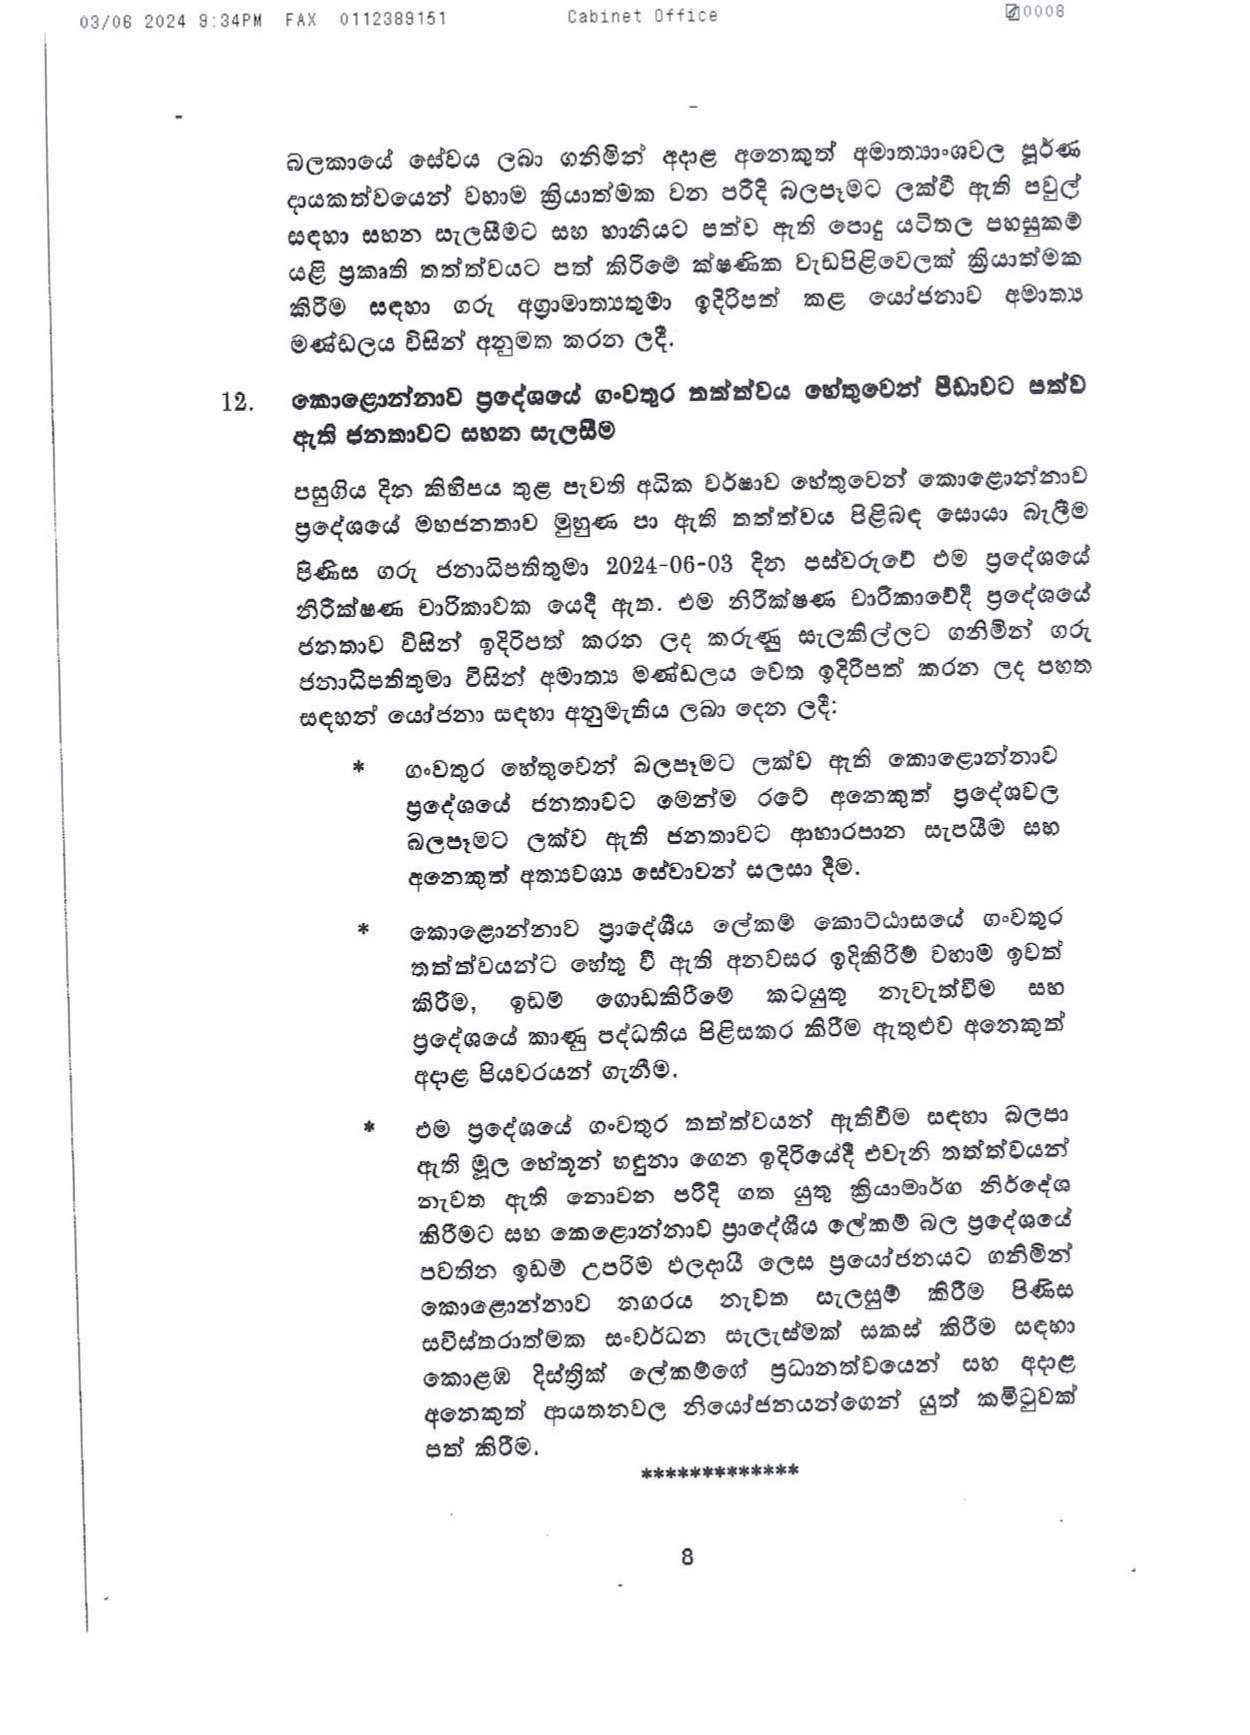 Cabinet Decisions on 03.06.2024 1 page 0008